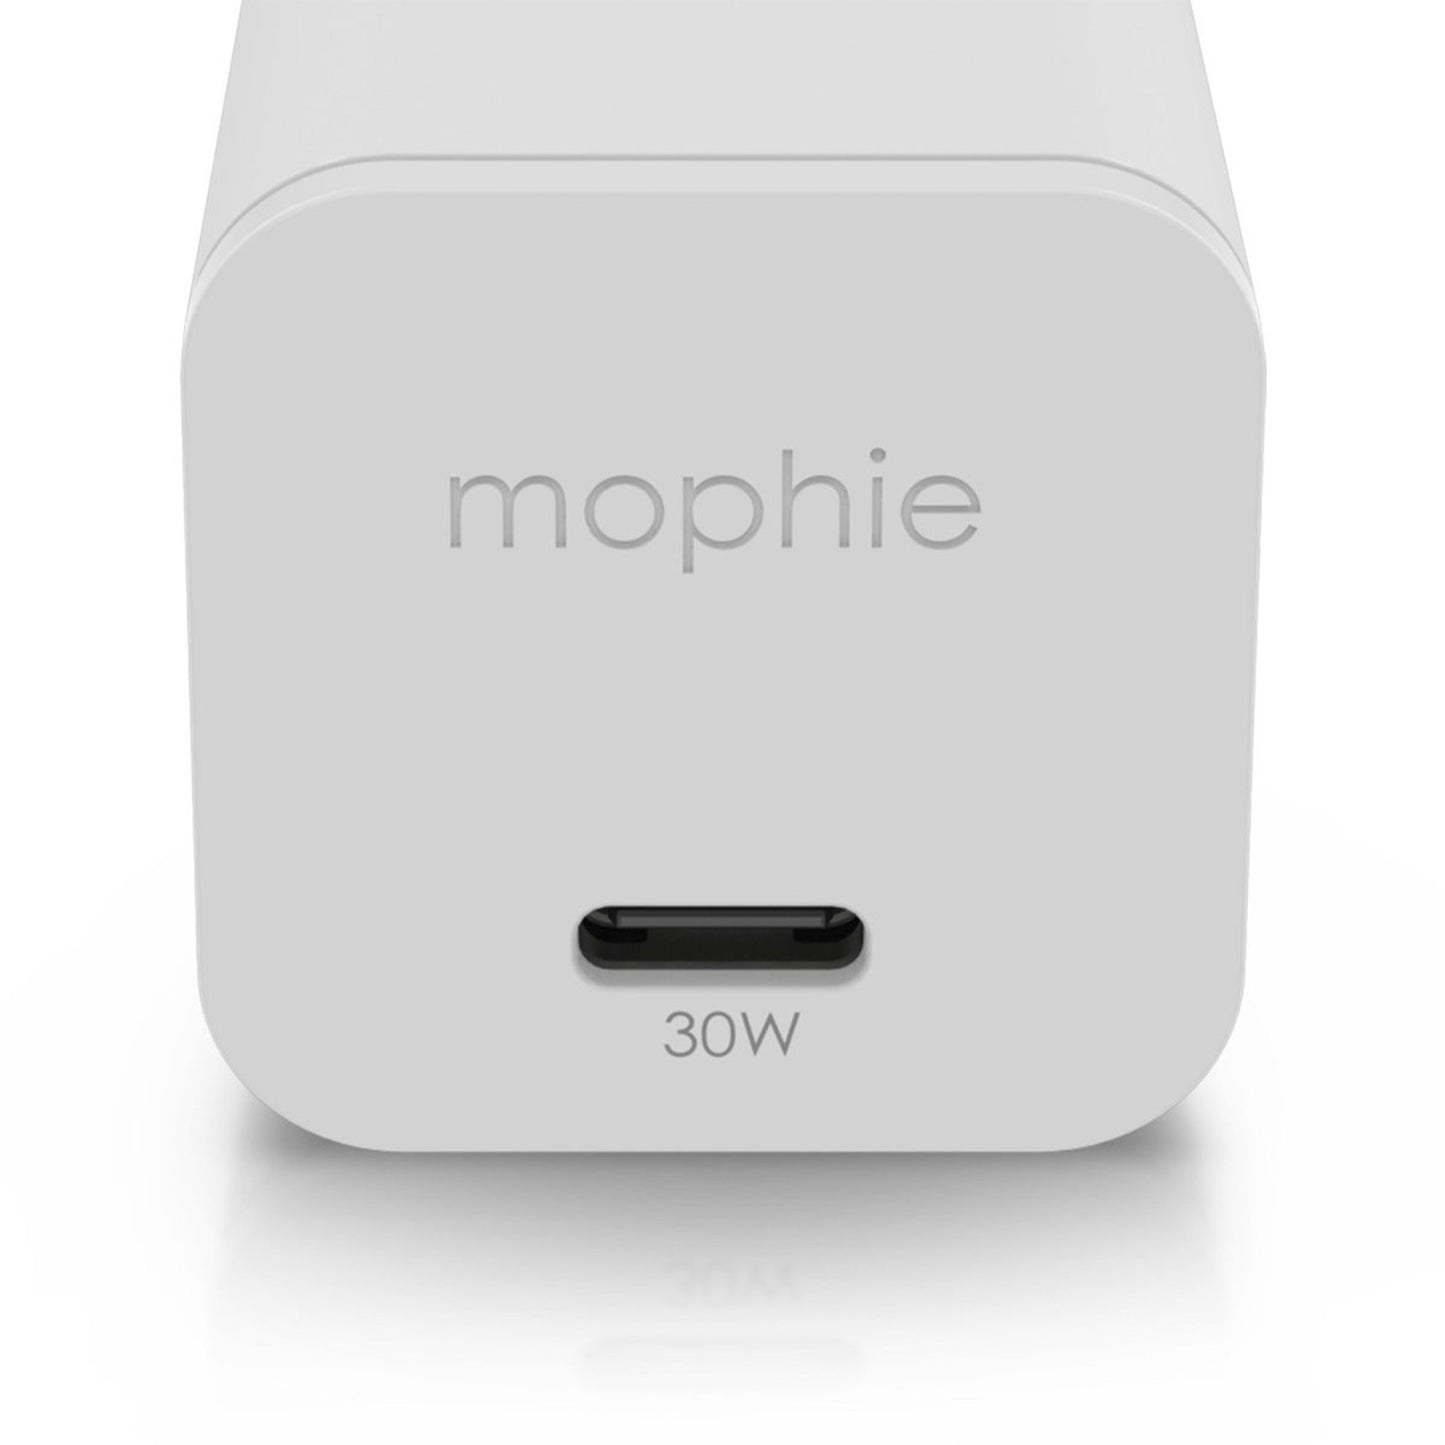 Mophie 30W USB-C Speedport GaN Wall Charger w/Cable - White - 15-11948